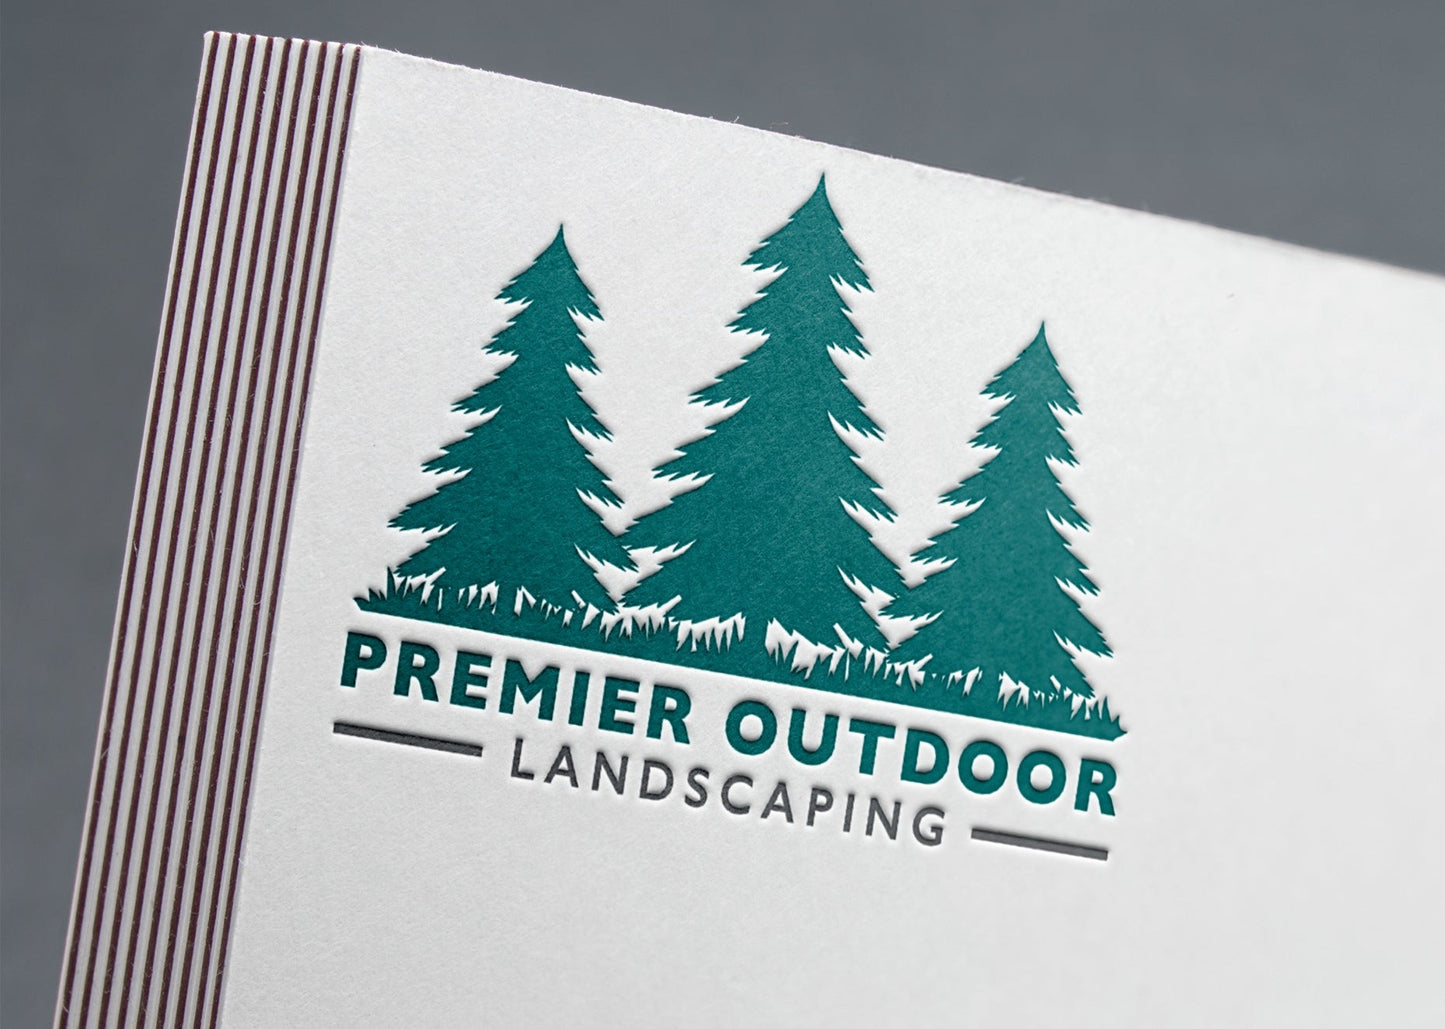 Logo Design - Landscaping Business | Lawn Care Company | Lawn Maintenance | Tree Service | Pine Tree